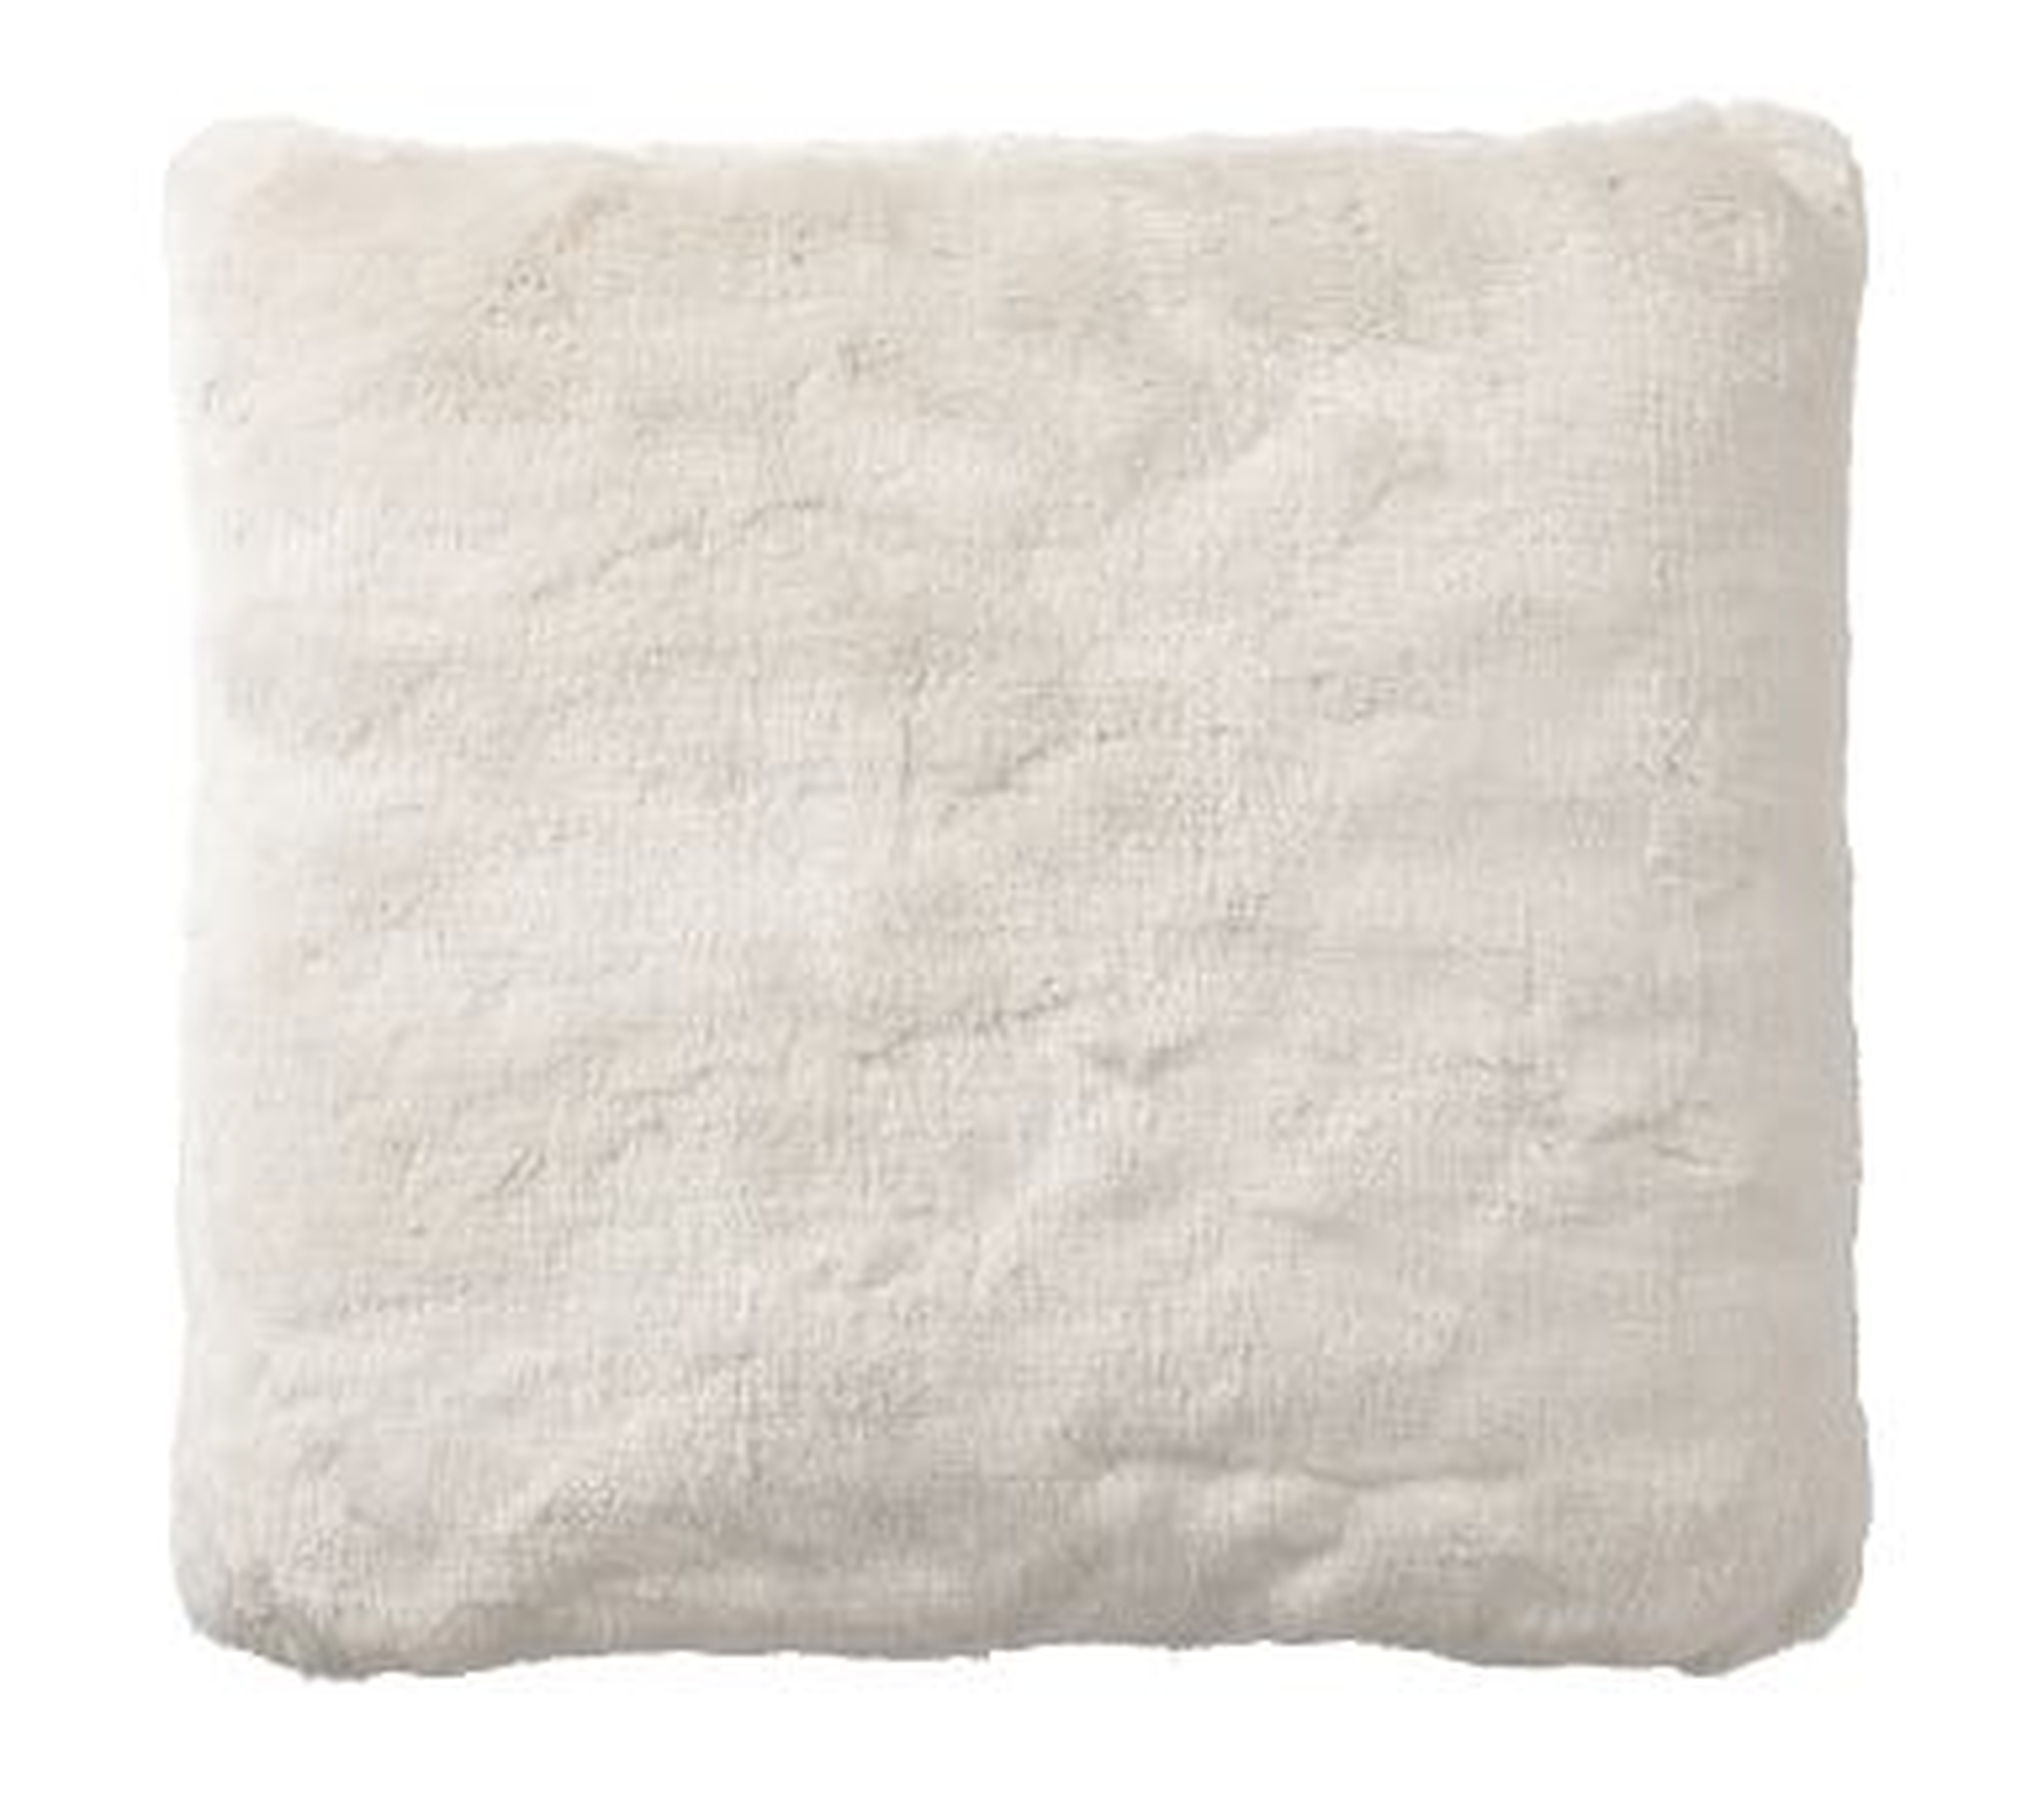 Faux Fur Pillow Cover, 18", Ivory Alpaca - Pottery Barn